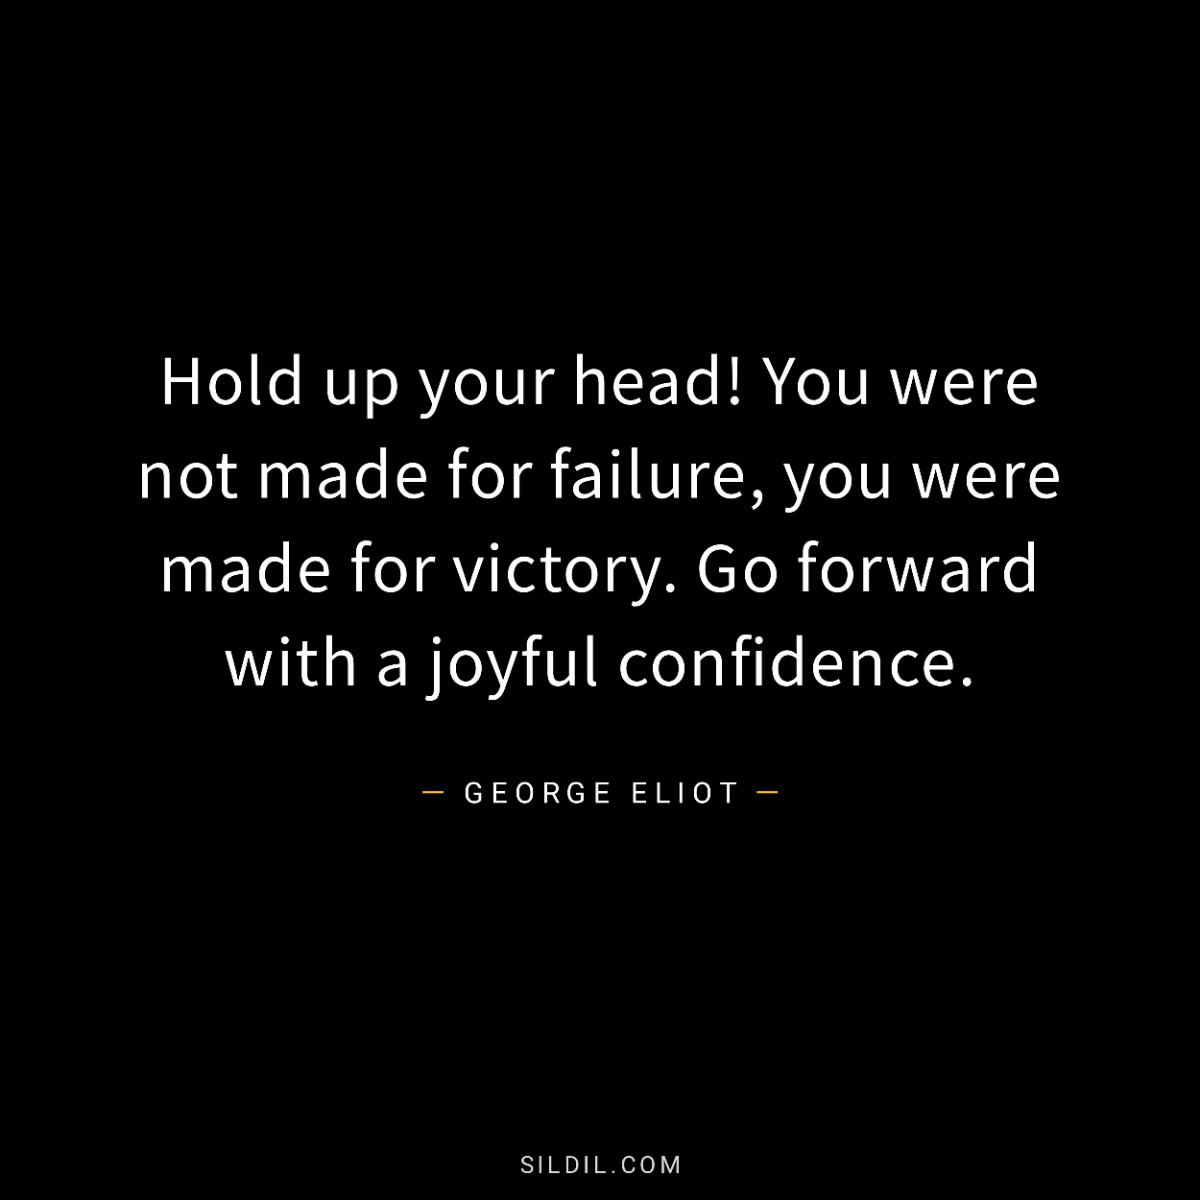 Hold up your head! You were not made for failure, you were made for victory. Go forward with a joyful confidence.